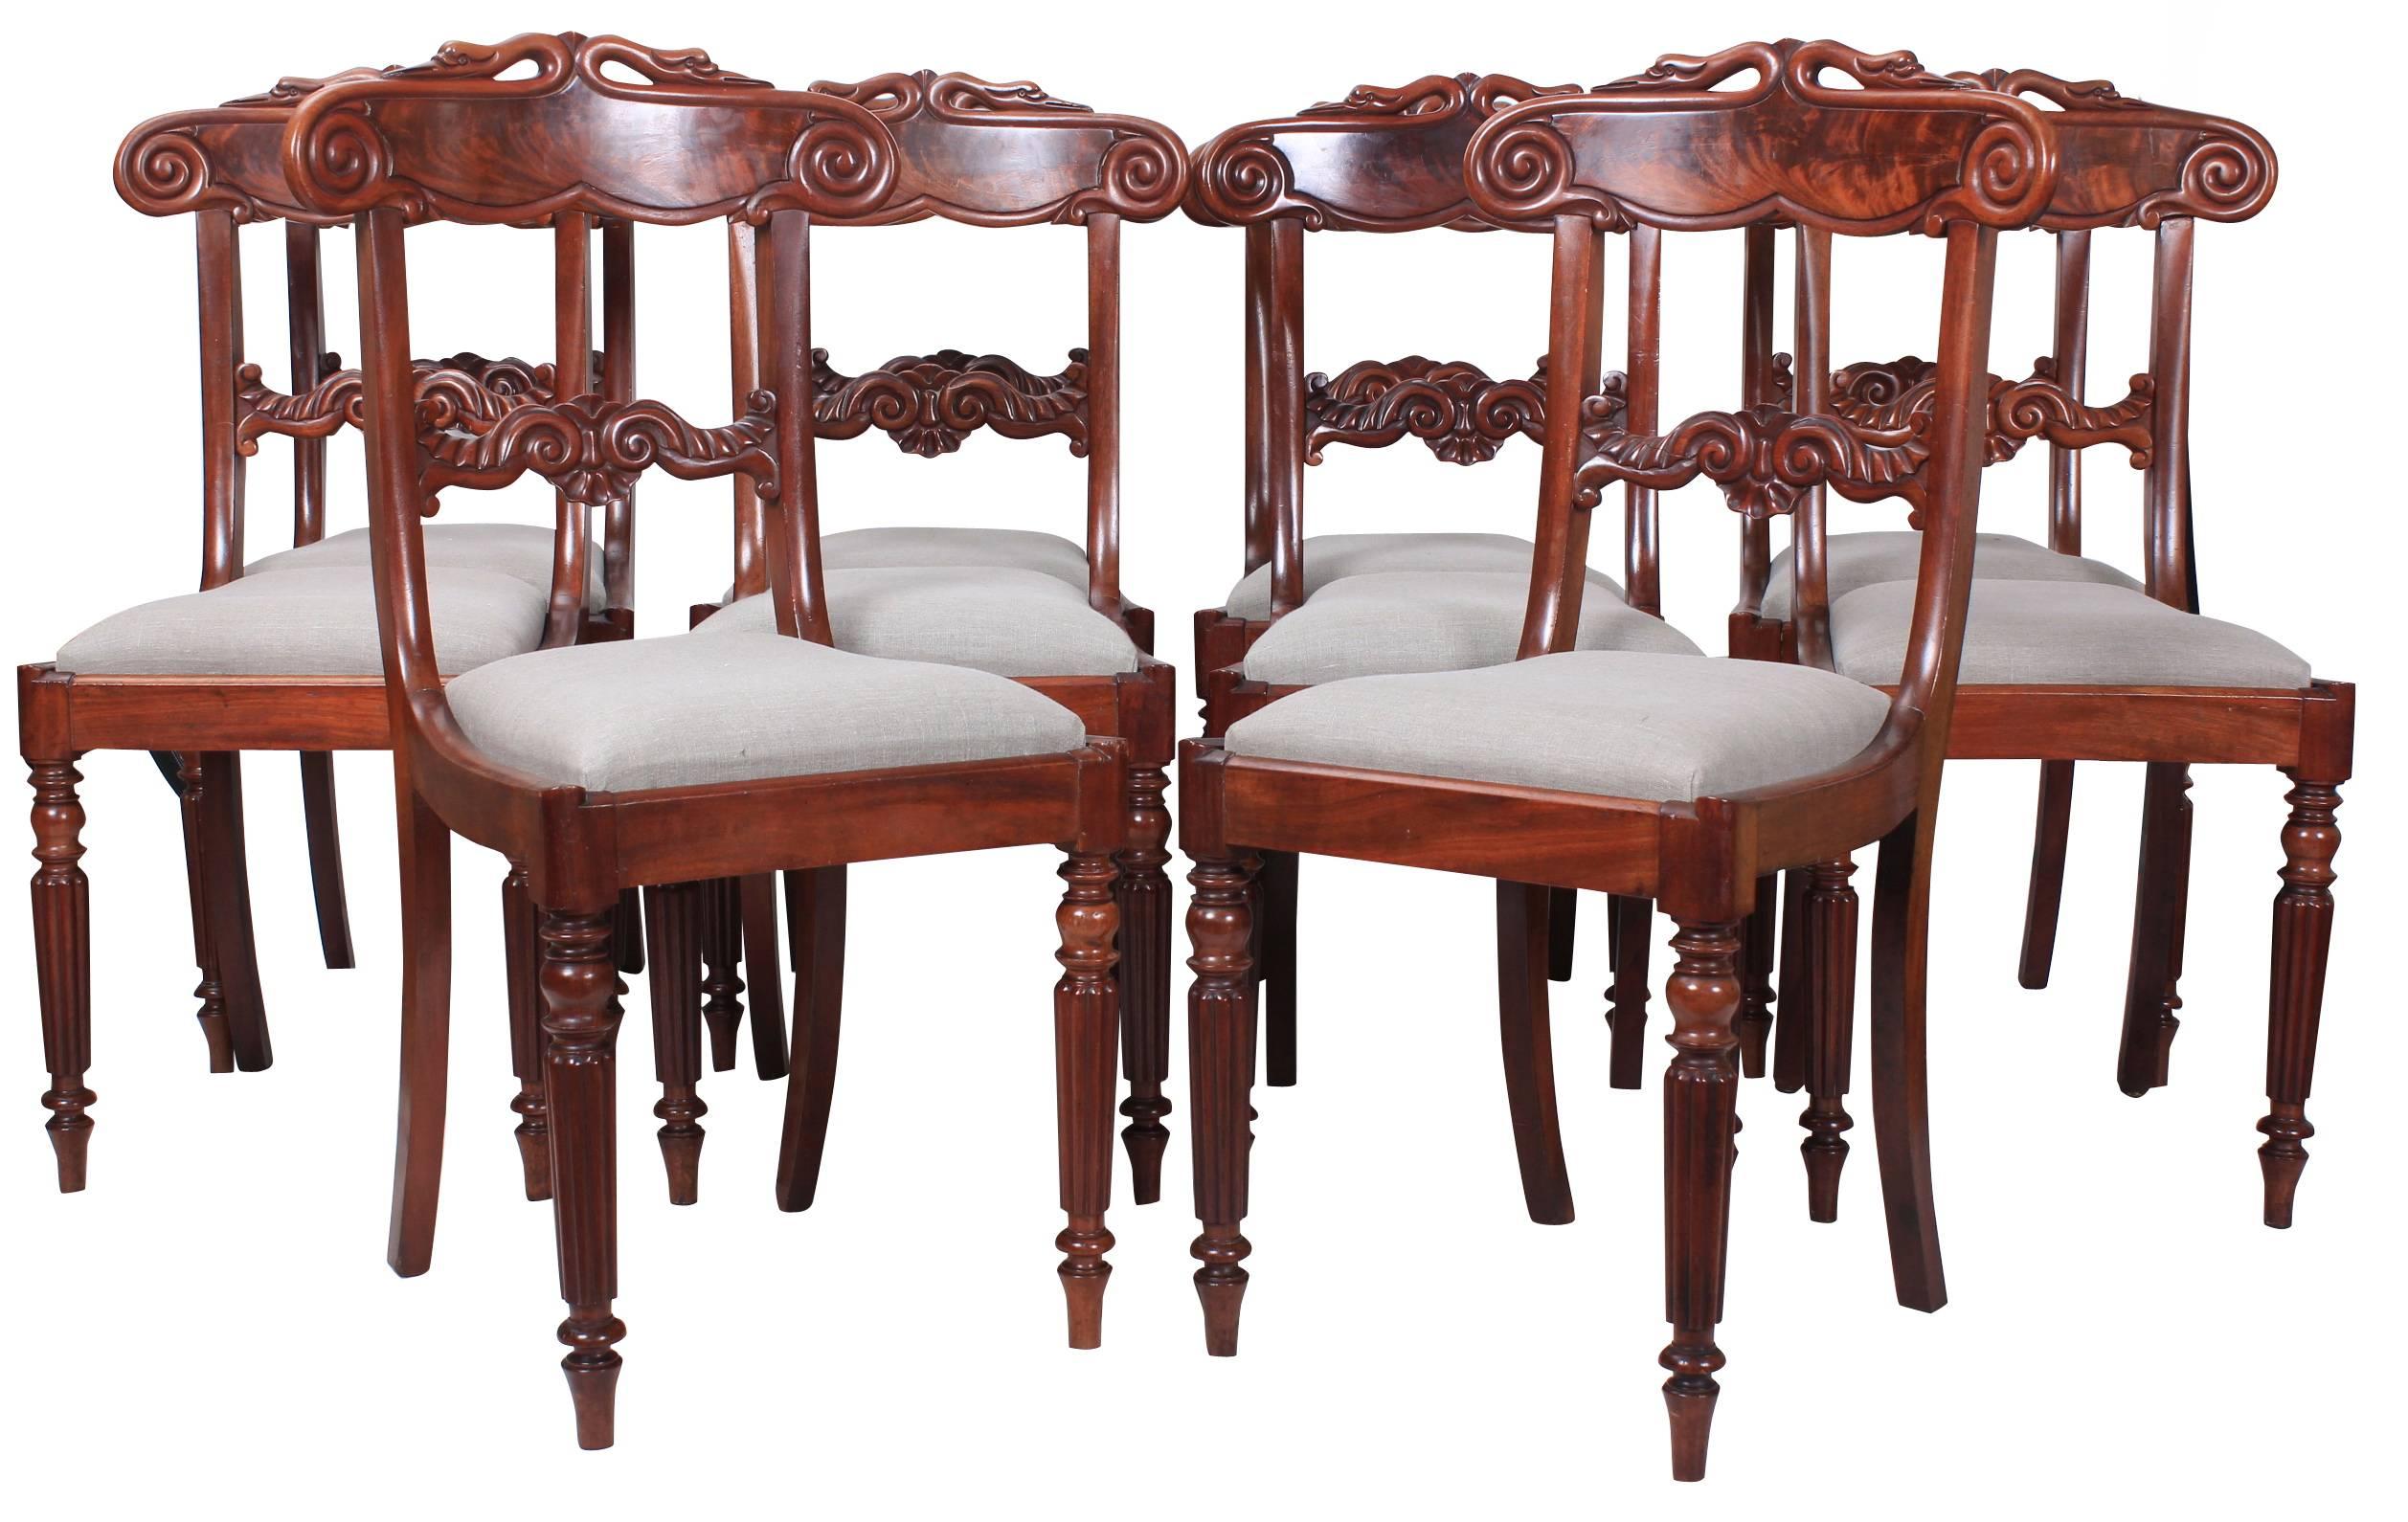 English, circa 1825.
A wonderful set of ten mahogany dining chairs in good original condition.
With newly upholstered neutral linen seats.
The frames boast a fantastic flame mahogany color, with bar backs and scroll carvings. Unique carved swan